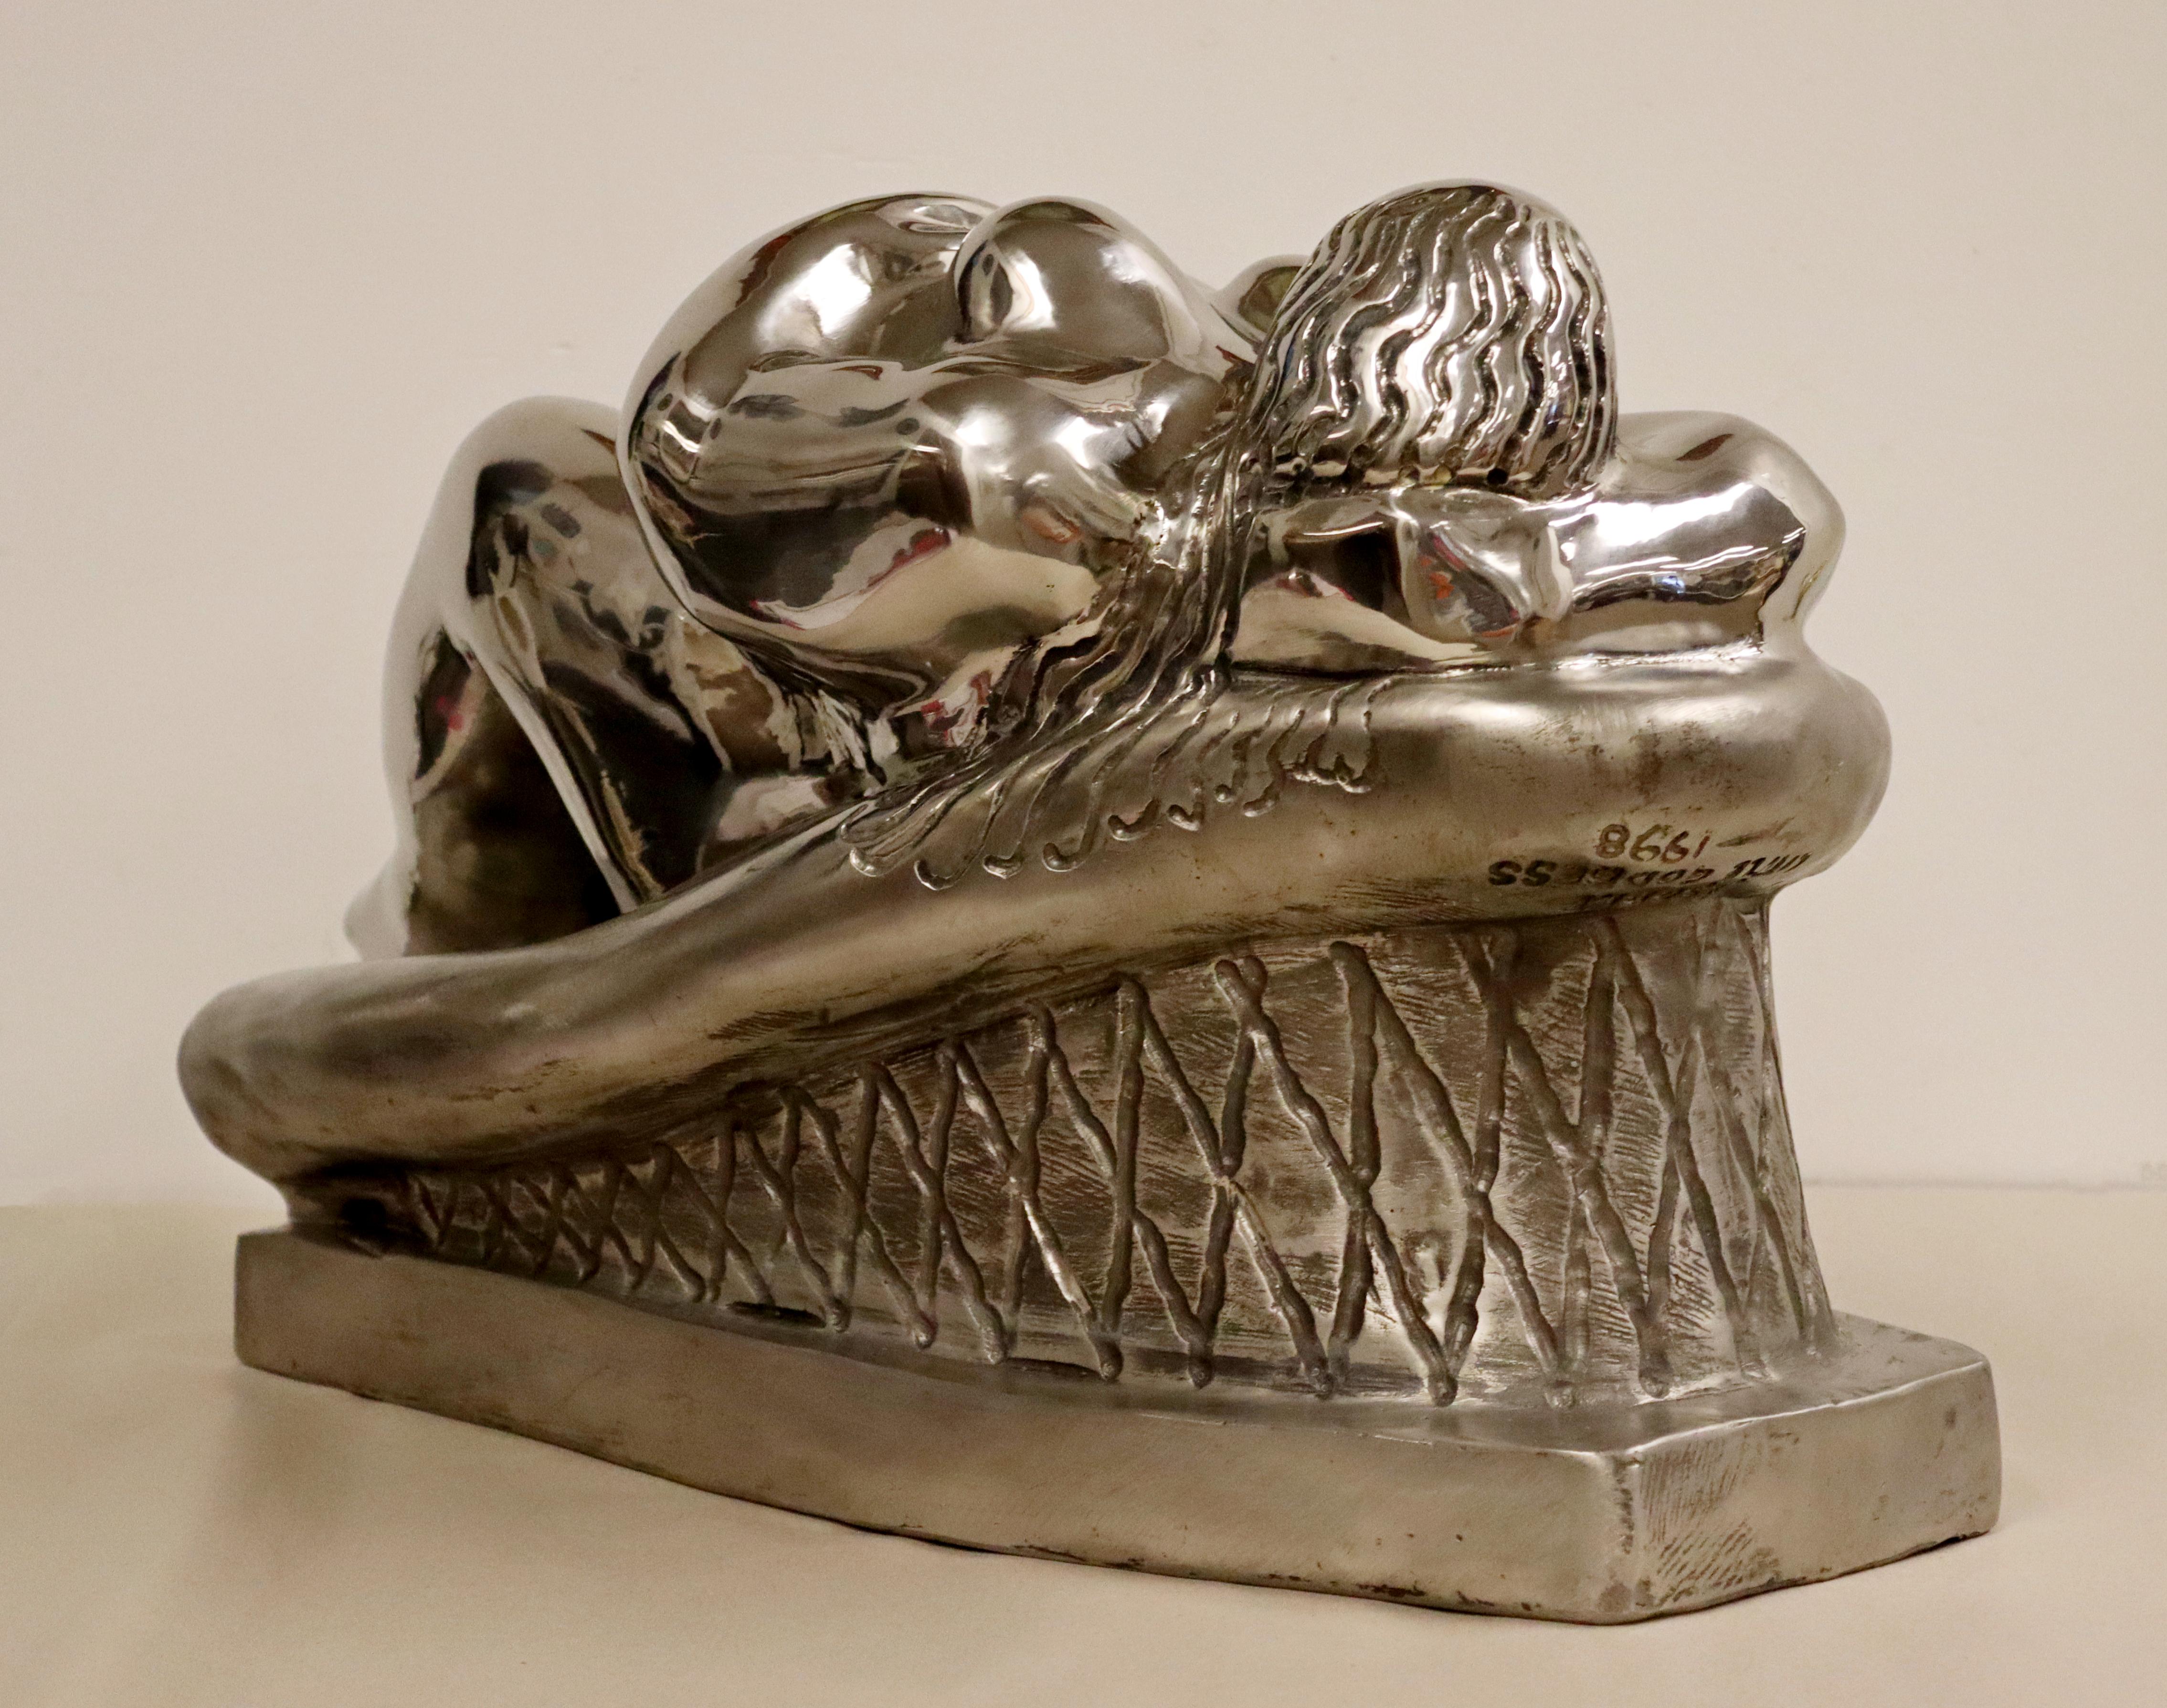 Contemporary Stainless Steel Little Goddess Table Sculpture by Jerry Soble 1990s For Sale 3